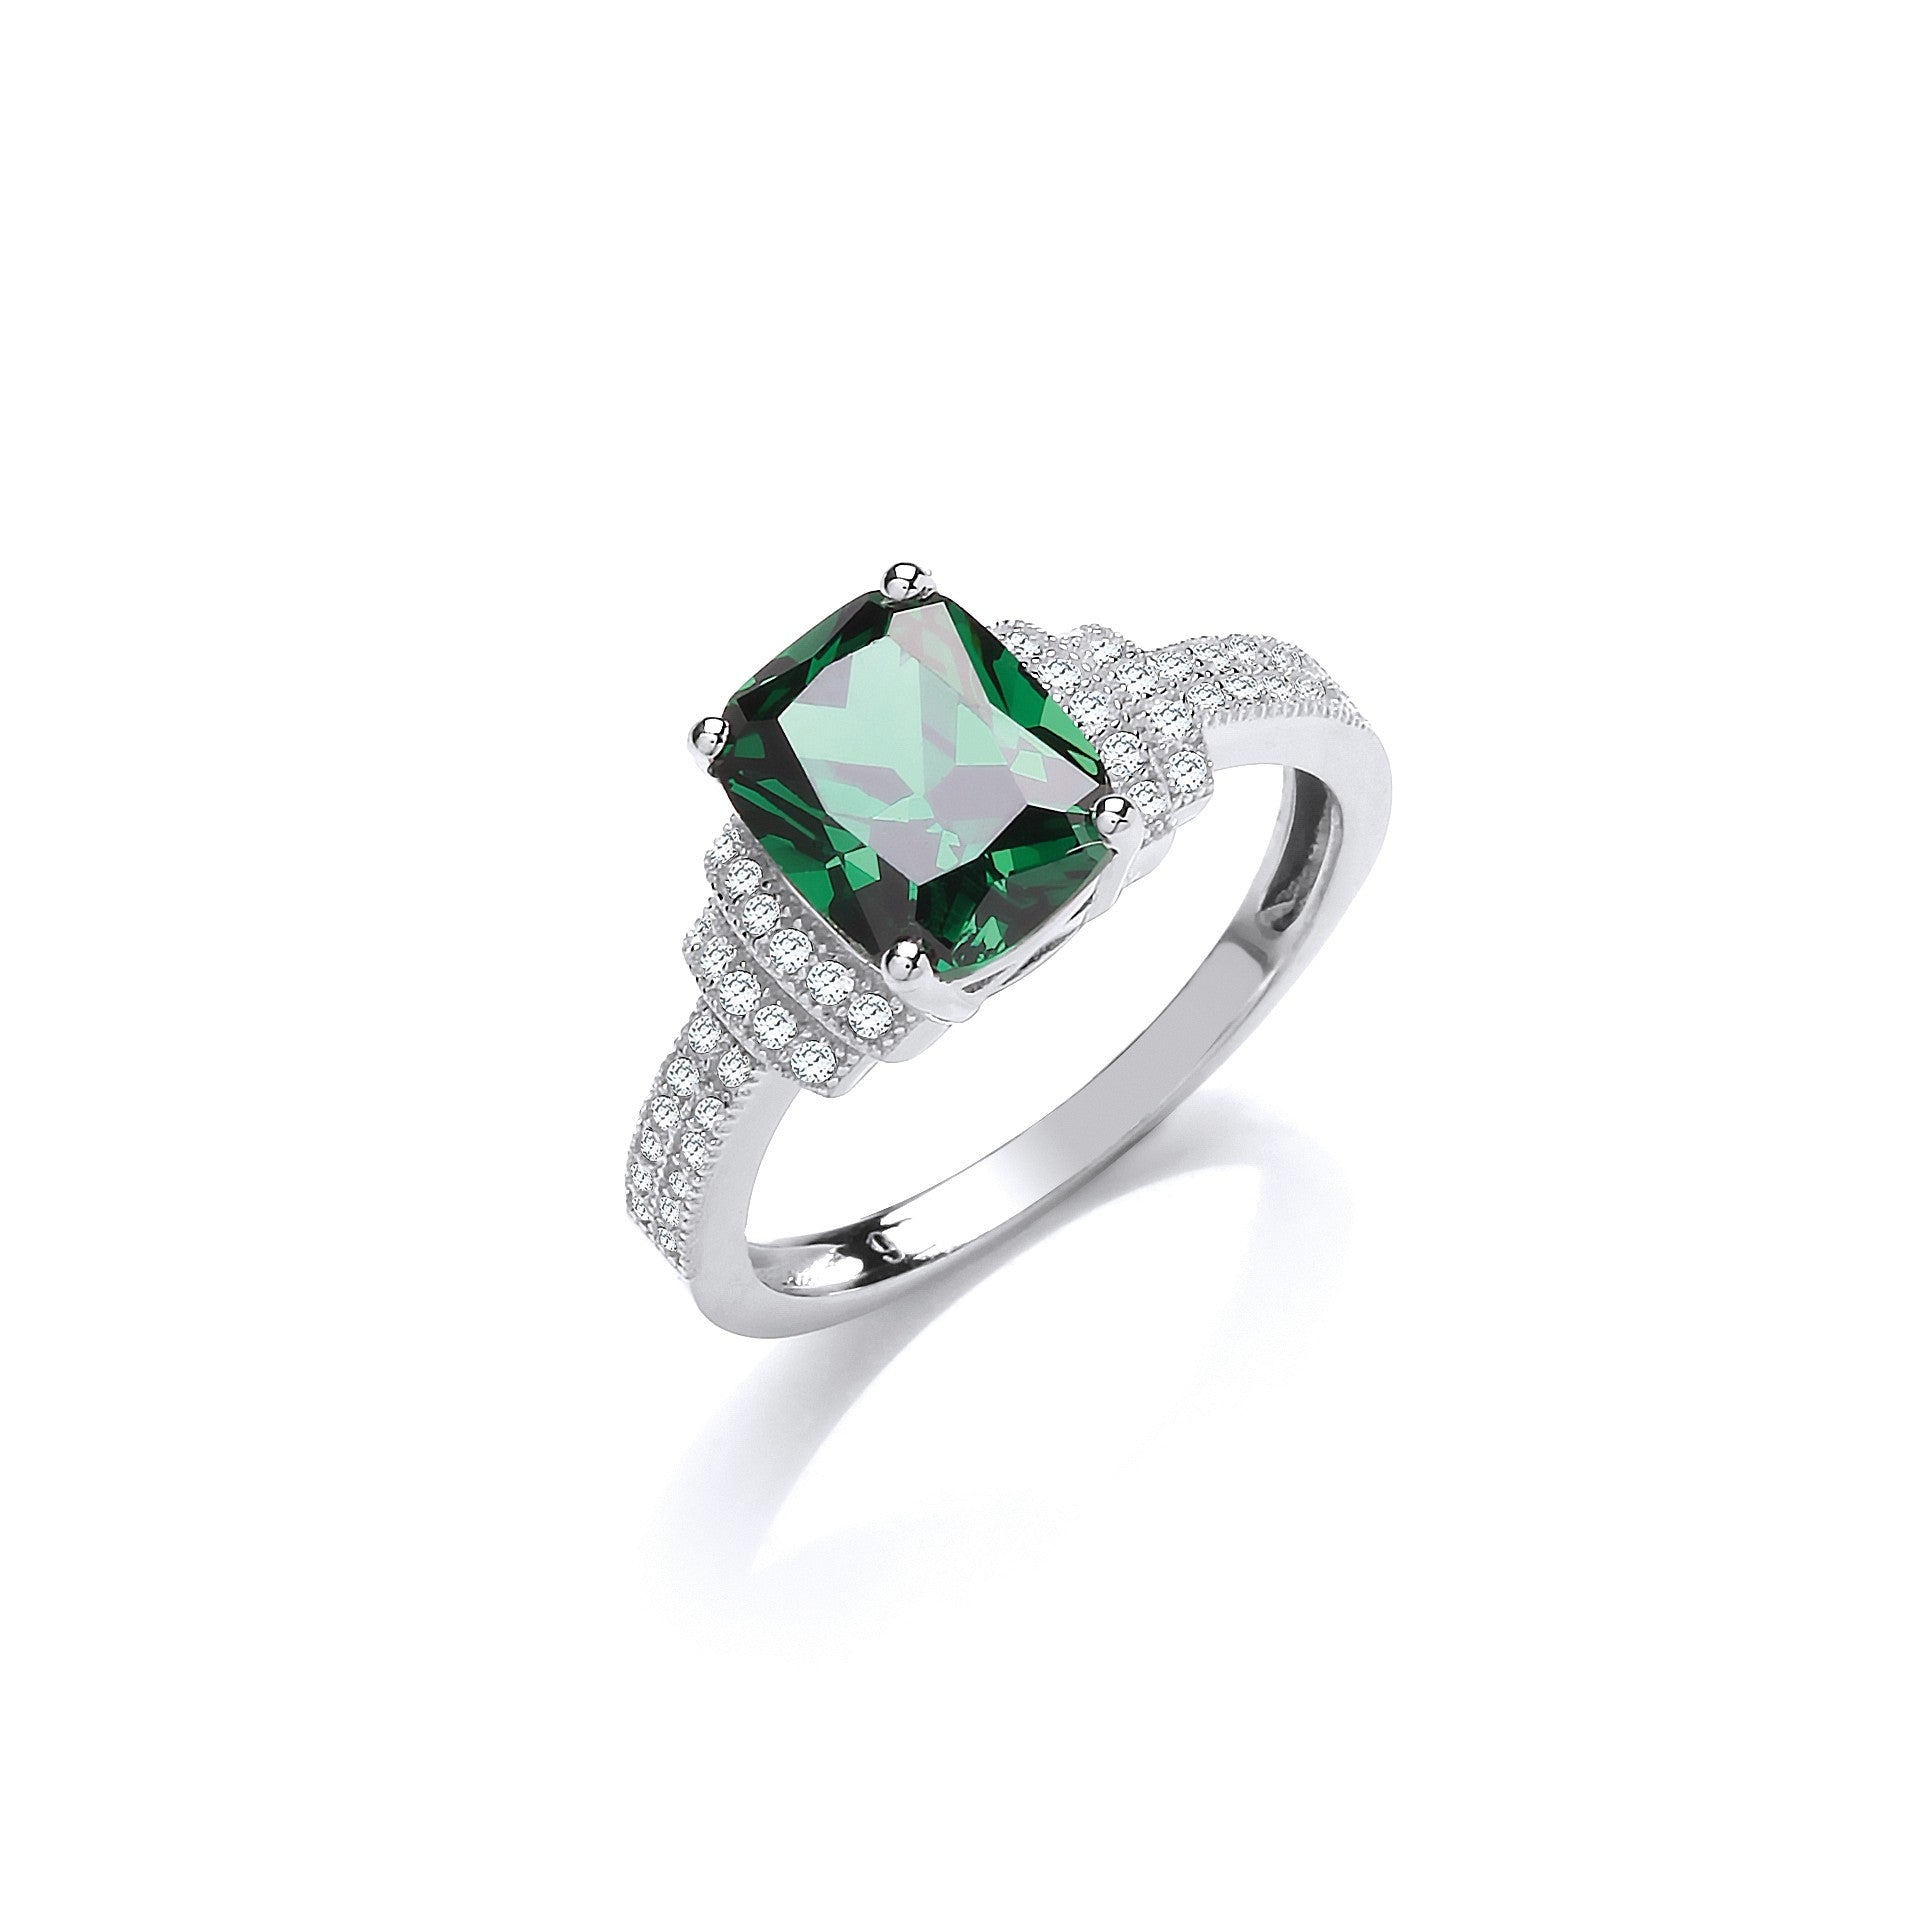 Emerald Cut Green Cubic Zirconia Centre with Clear Cubic Zirconia on Shoulder Silver Ring